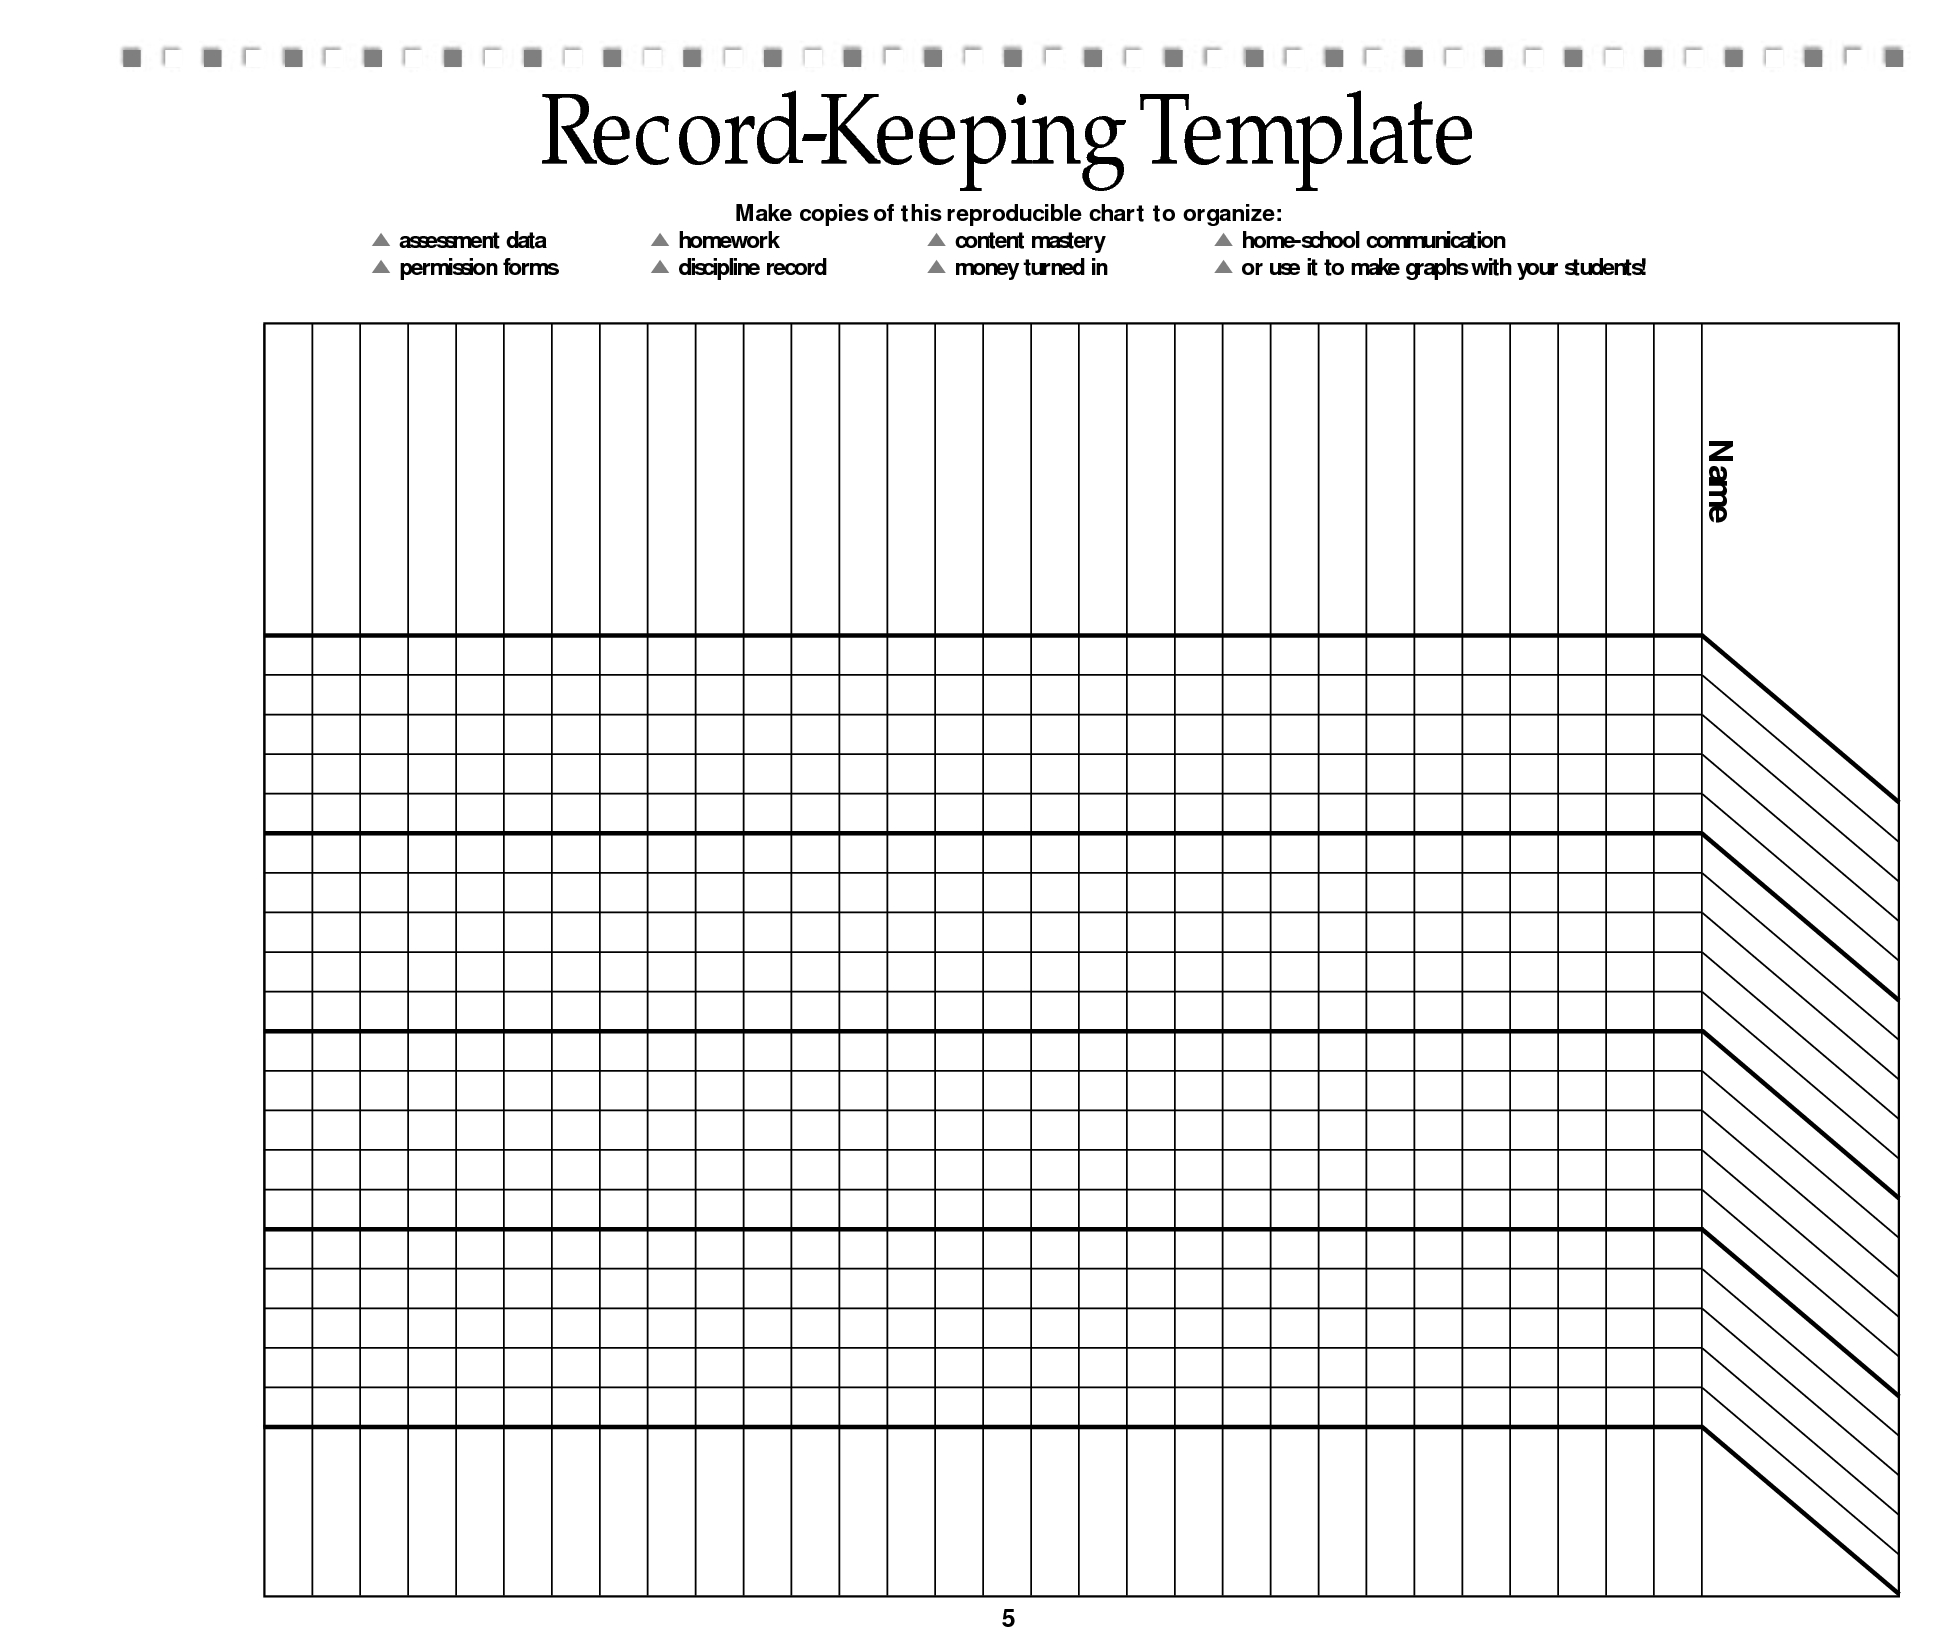 Free Printable Record Keeping Forms | Back To School | Pinterest - Free Printable Attendance Forms For Teachers